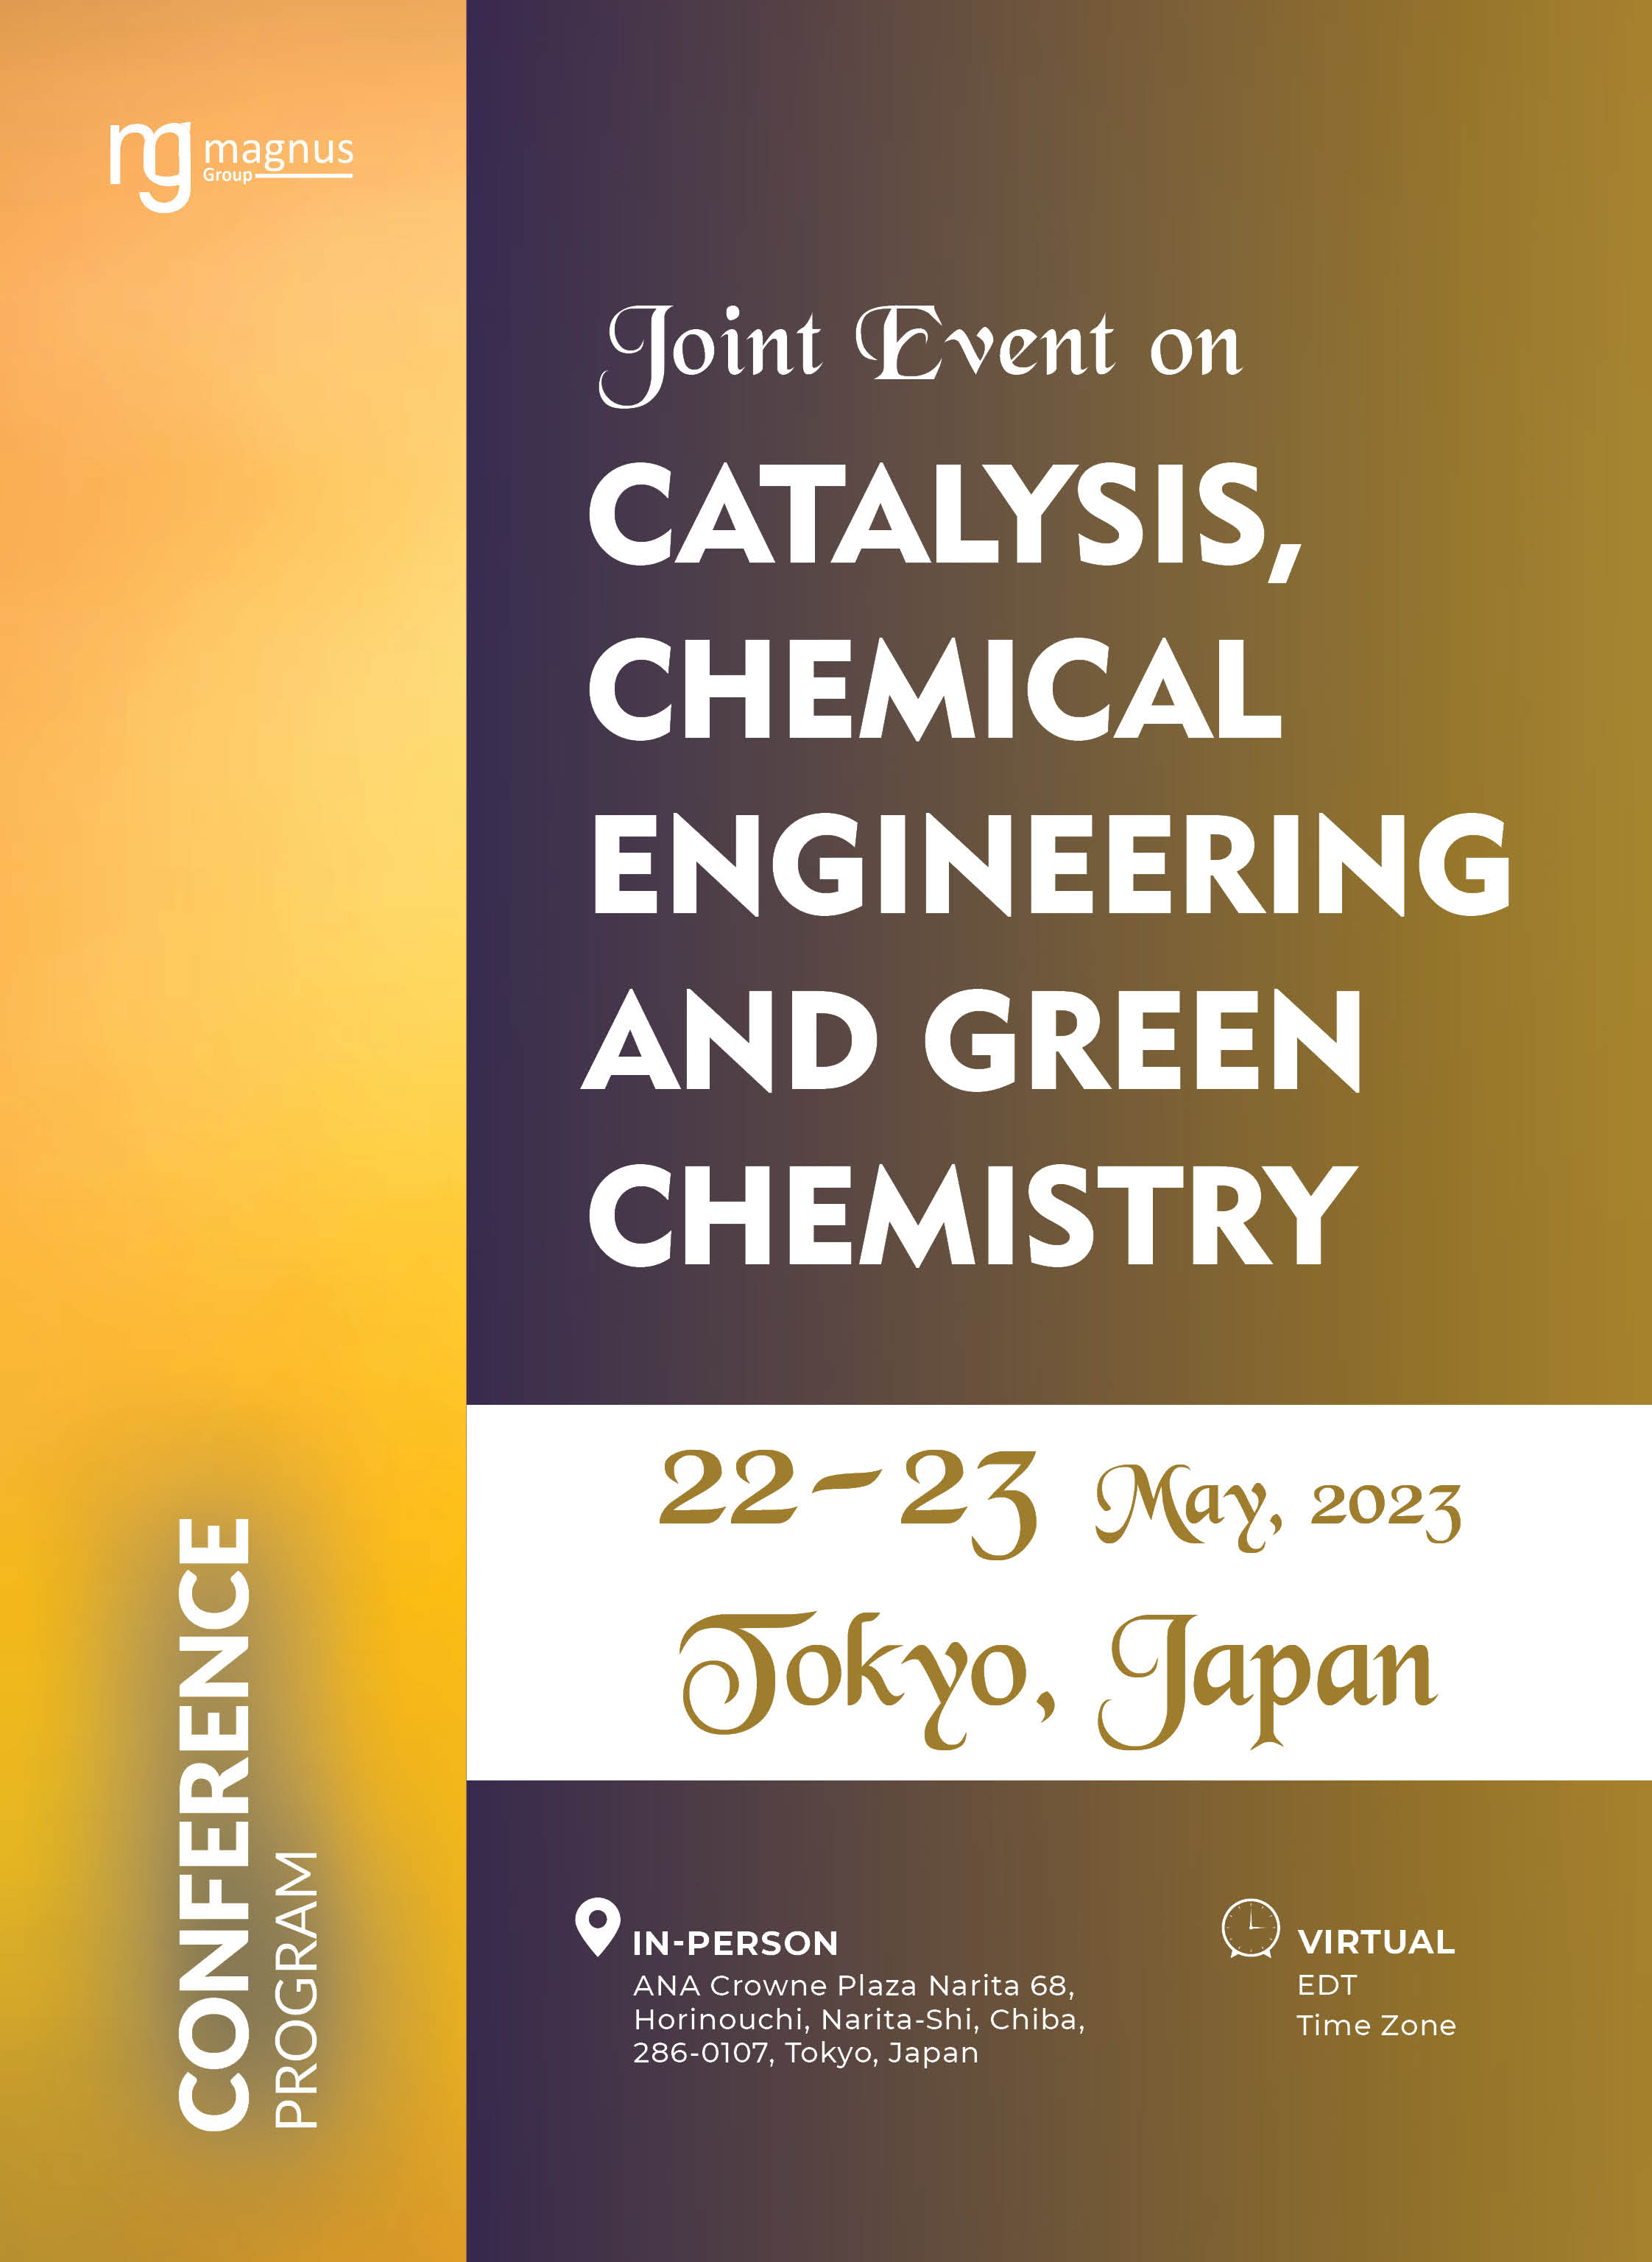 Catalysis, Chemical Engineering and Technology | Tokyo, Japan Program